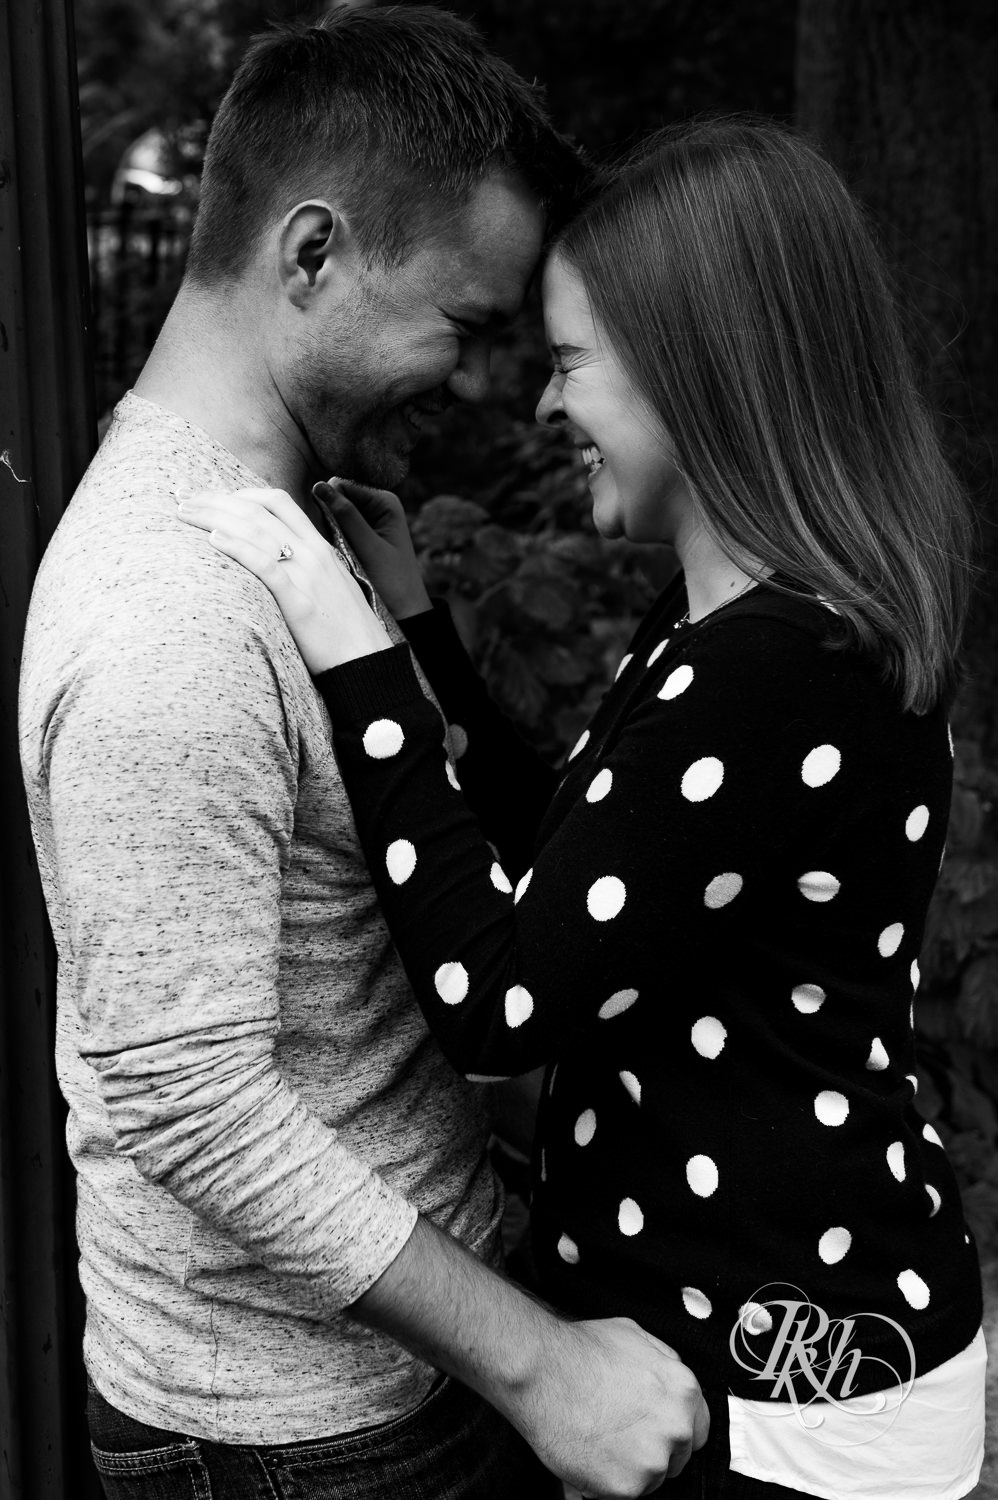 Man and woman in sweaters and jeans laugh during rainy day engagement photos in Excelsior, Minnesota.